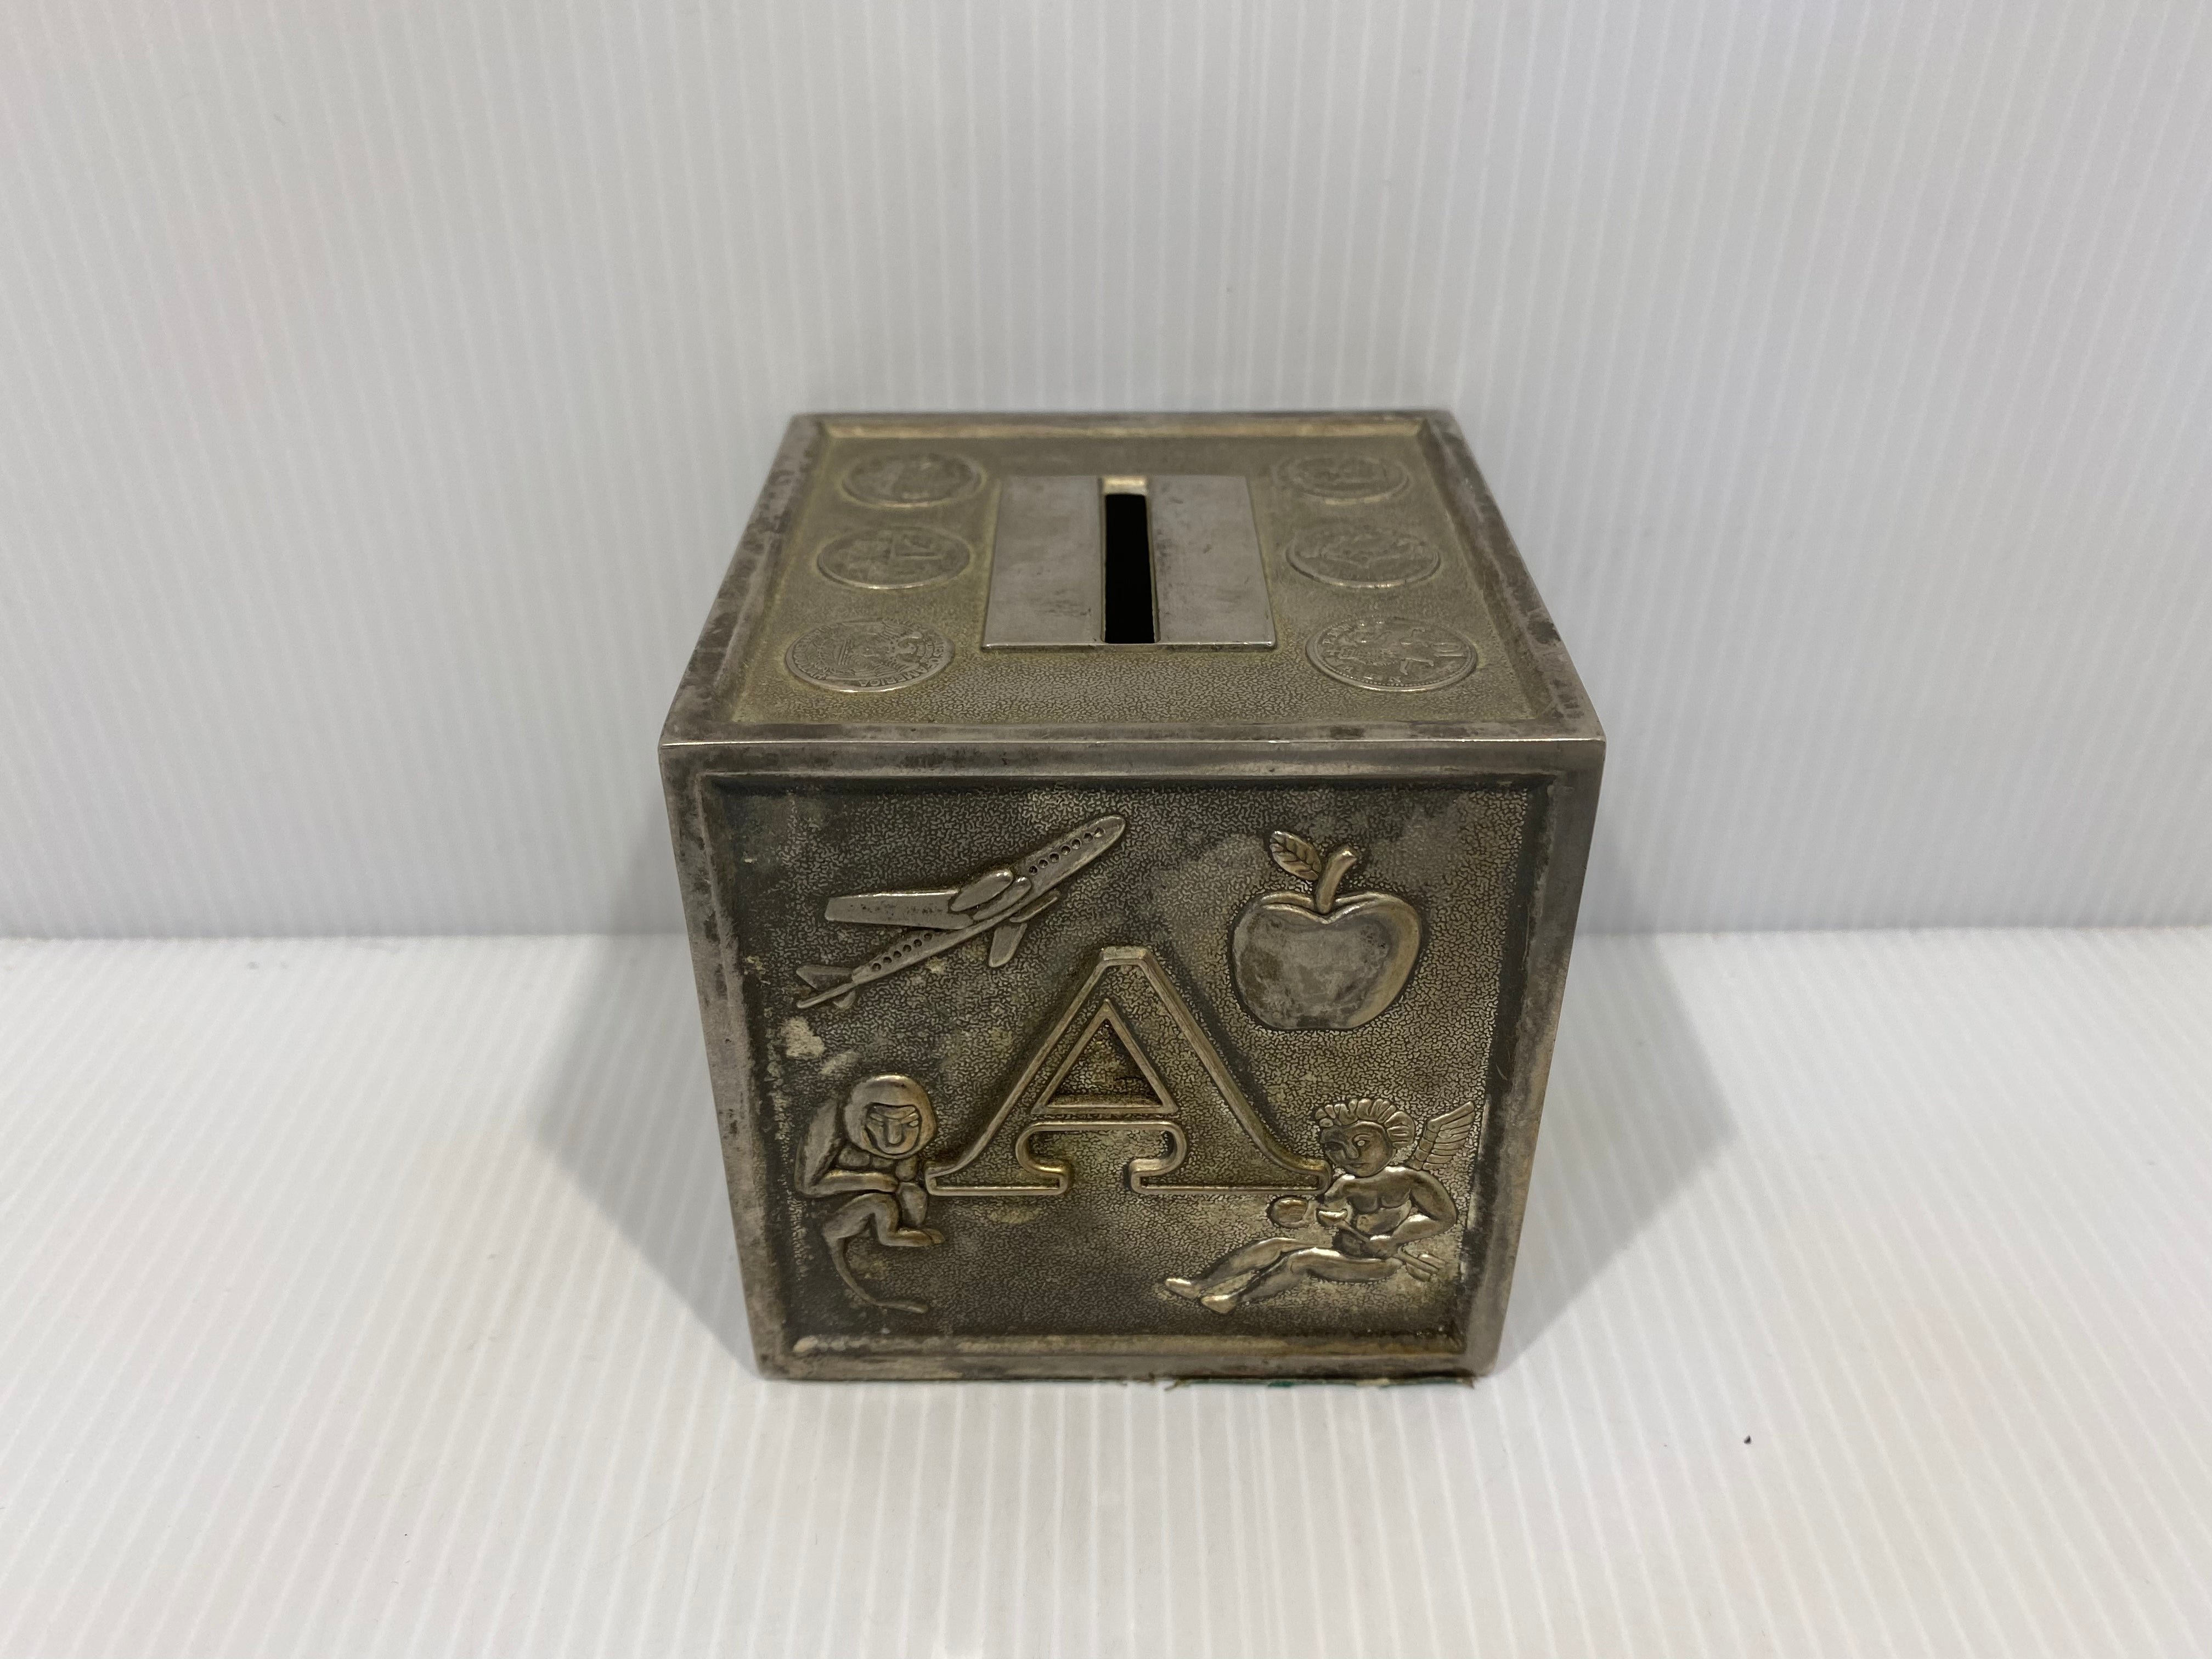 German 1960s coin bank is silver plated